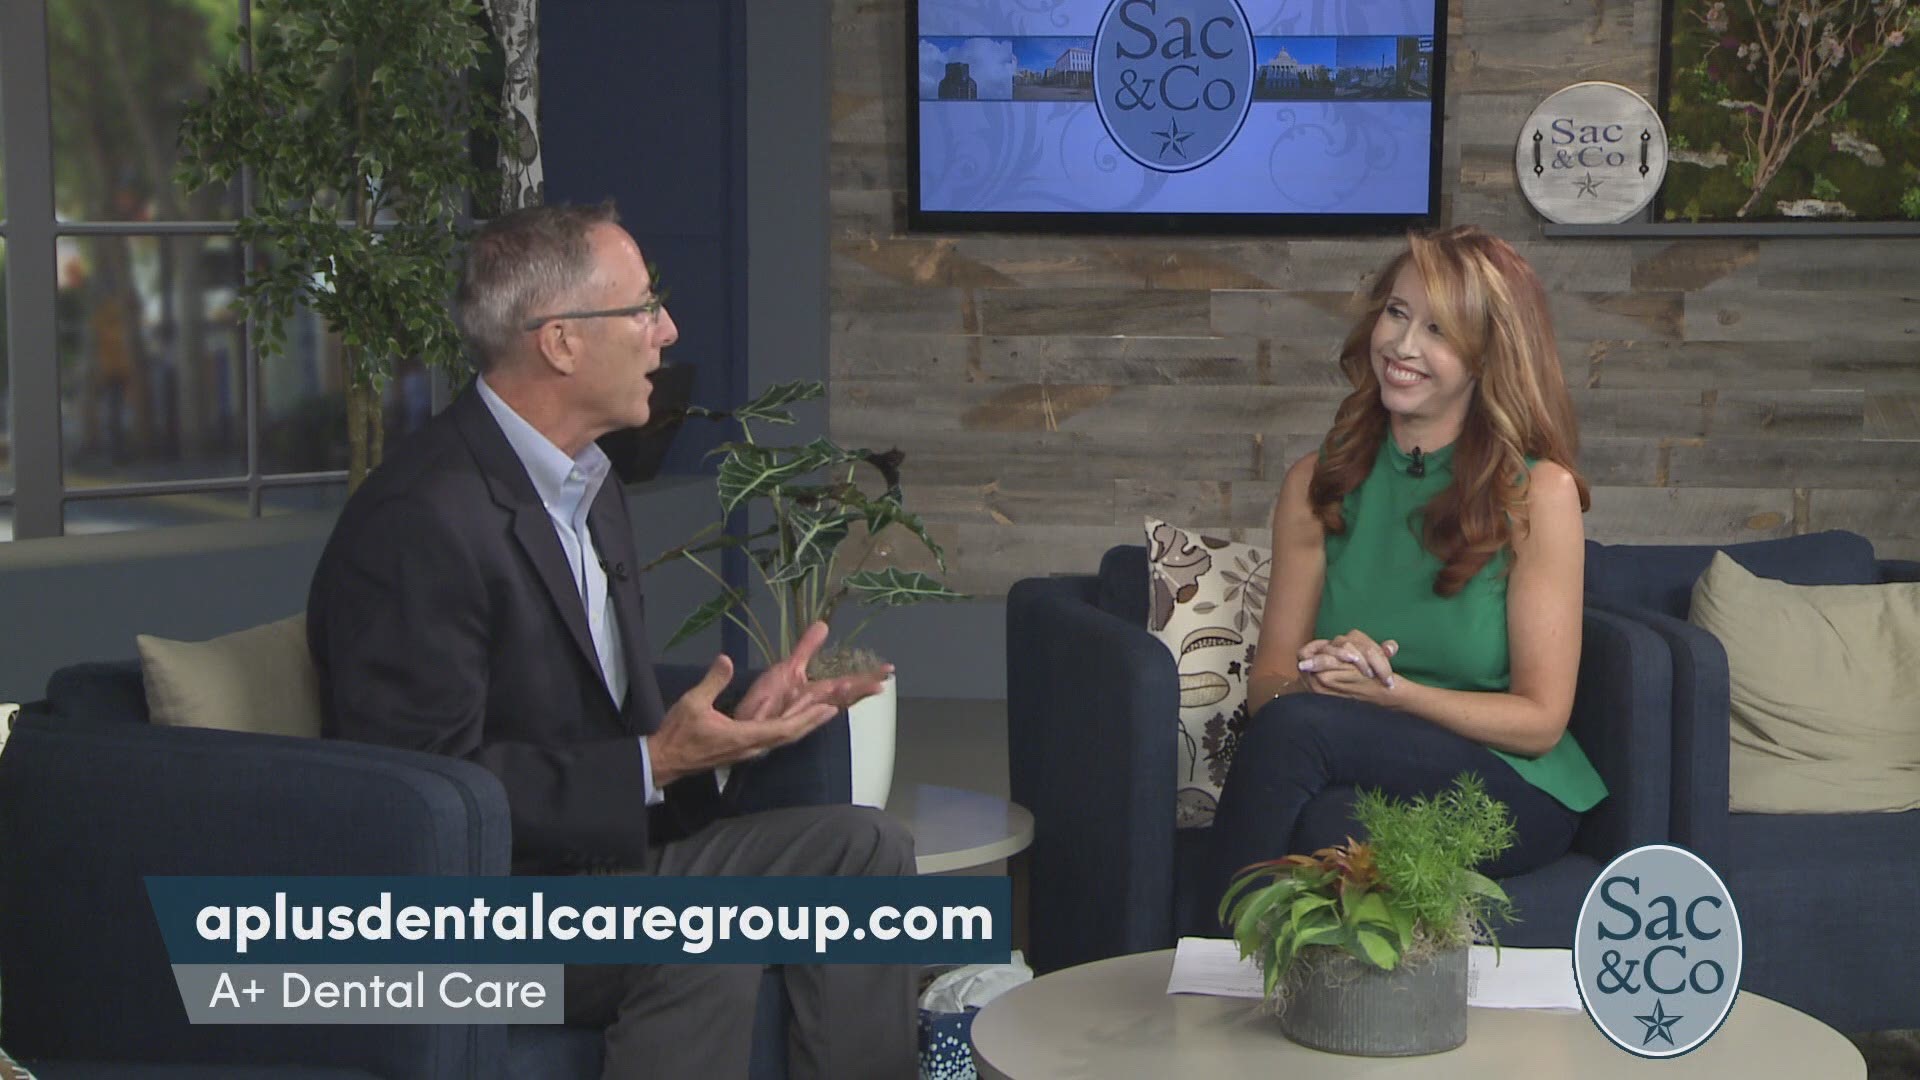 Looking to perfect your smile? A+ Dental Care wants to help! Learn about their crowns and veneers and which option is right for you! The following is a paid segment sponsored by A+ Dental Care.